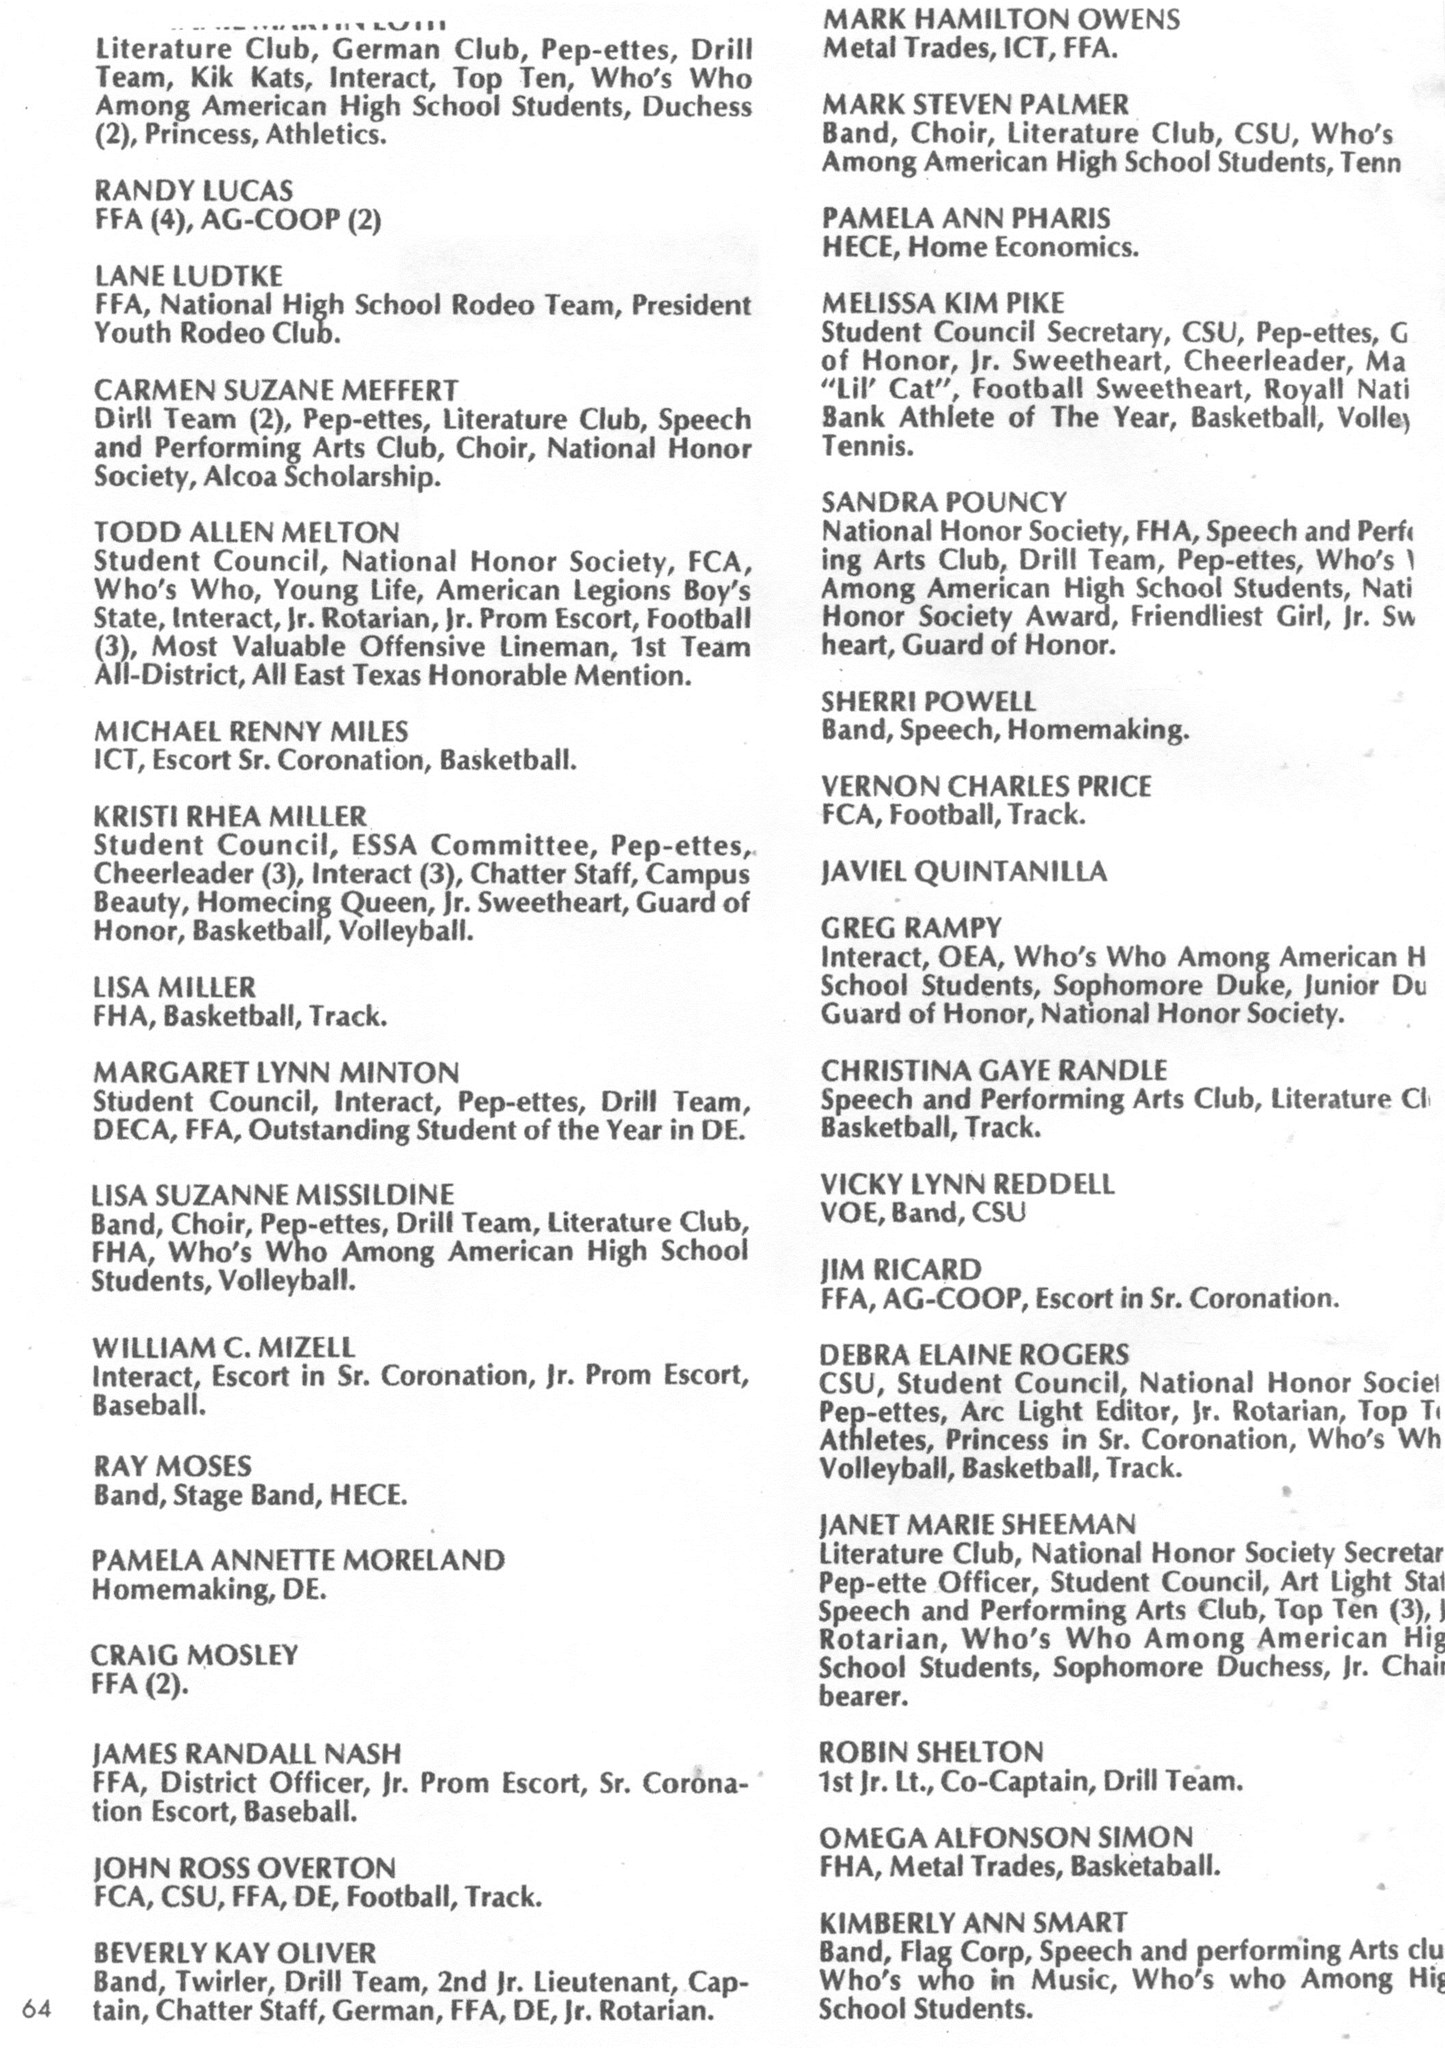 ../../../Images/Large/1981/Arclight-1981-pg0064.jpg